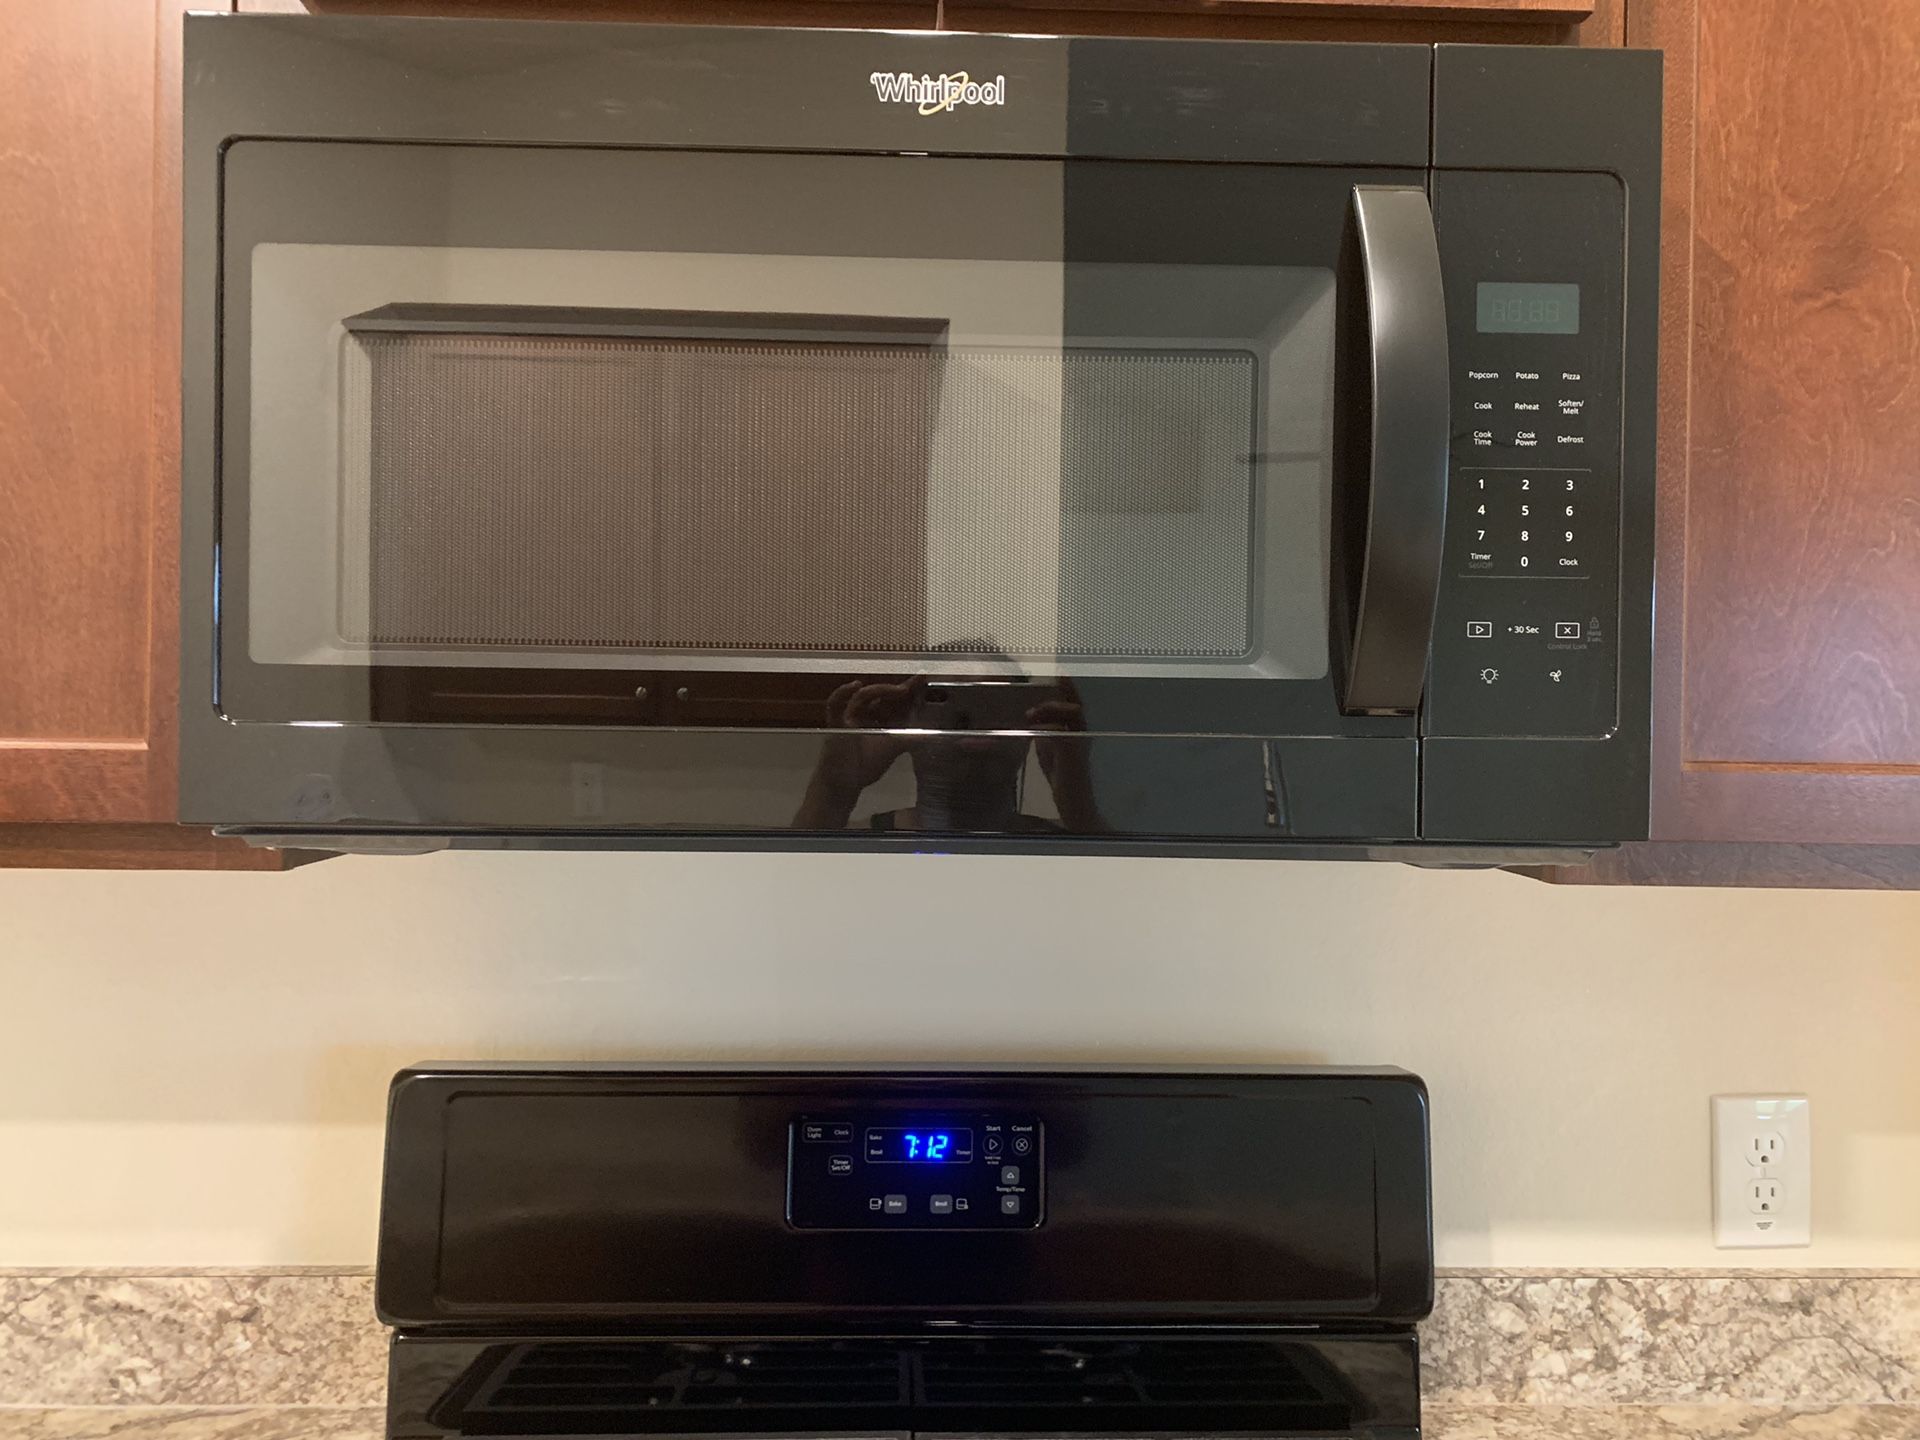 Brand new never used sold the stove so only have the dishwasher and over head microwave